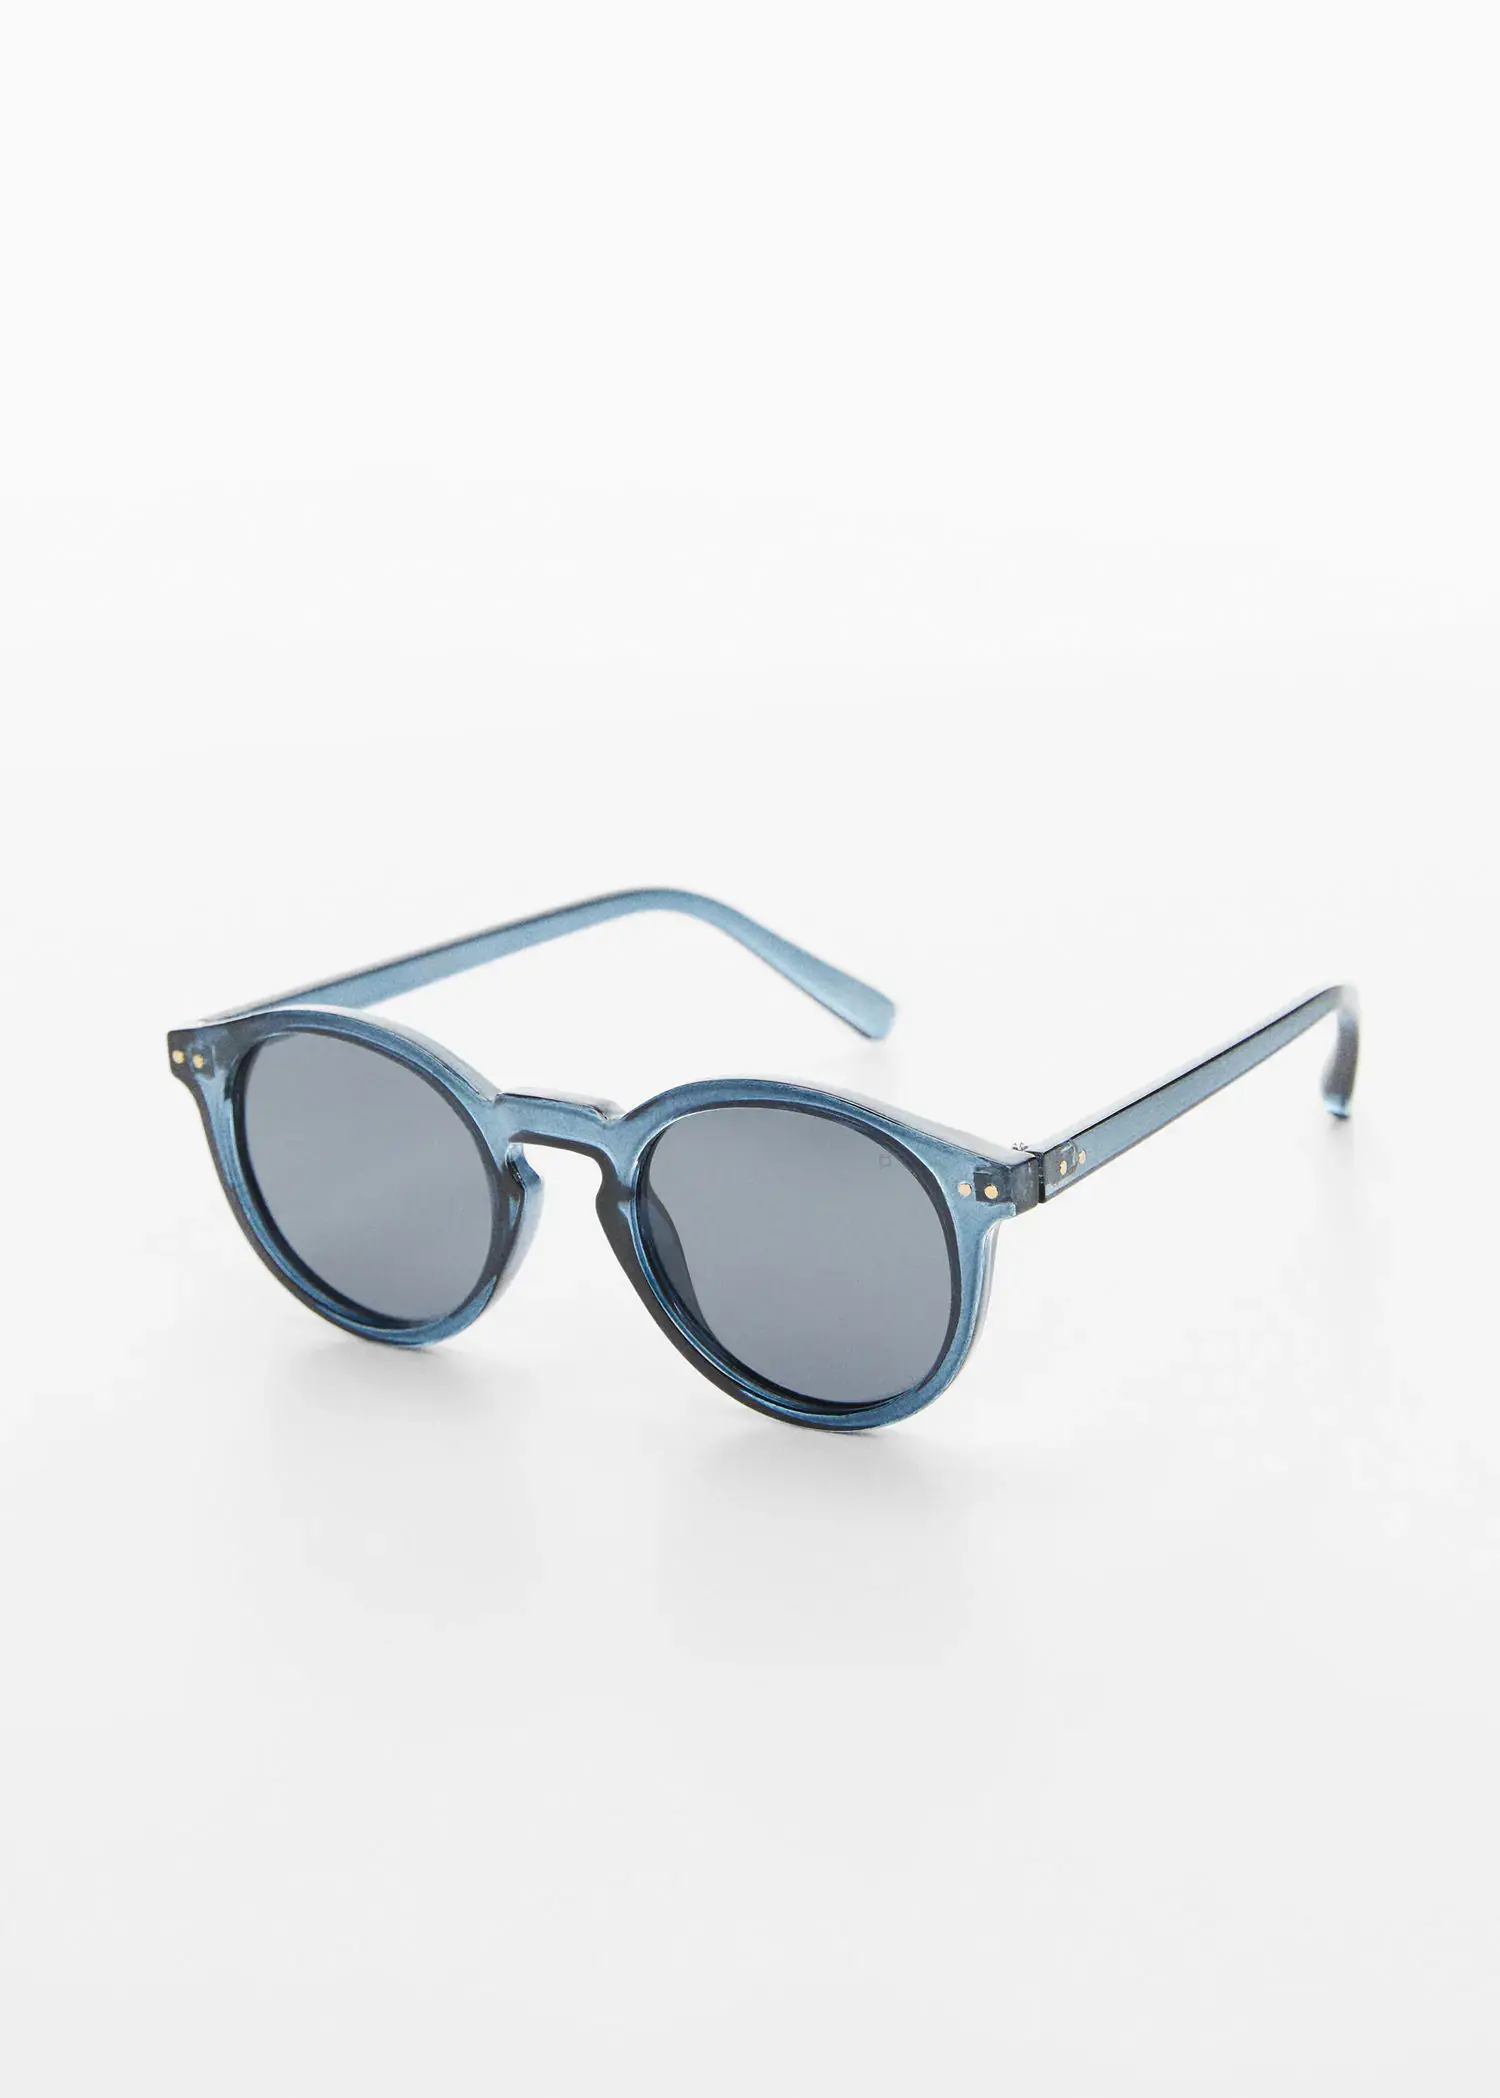 Mango Polarized sunglasses. a pair of sunglasses sitting on top of a white table. 